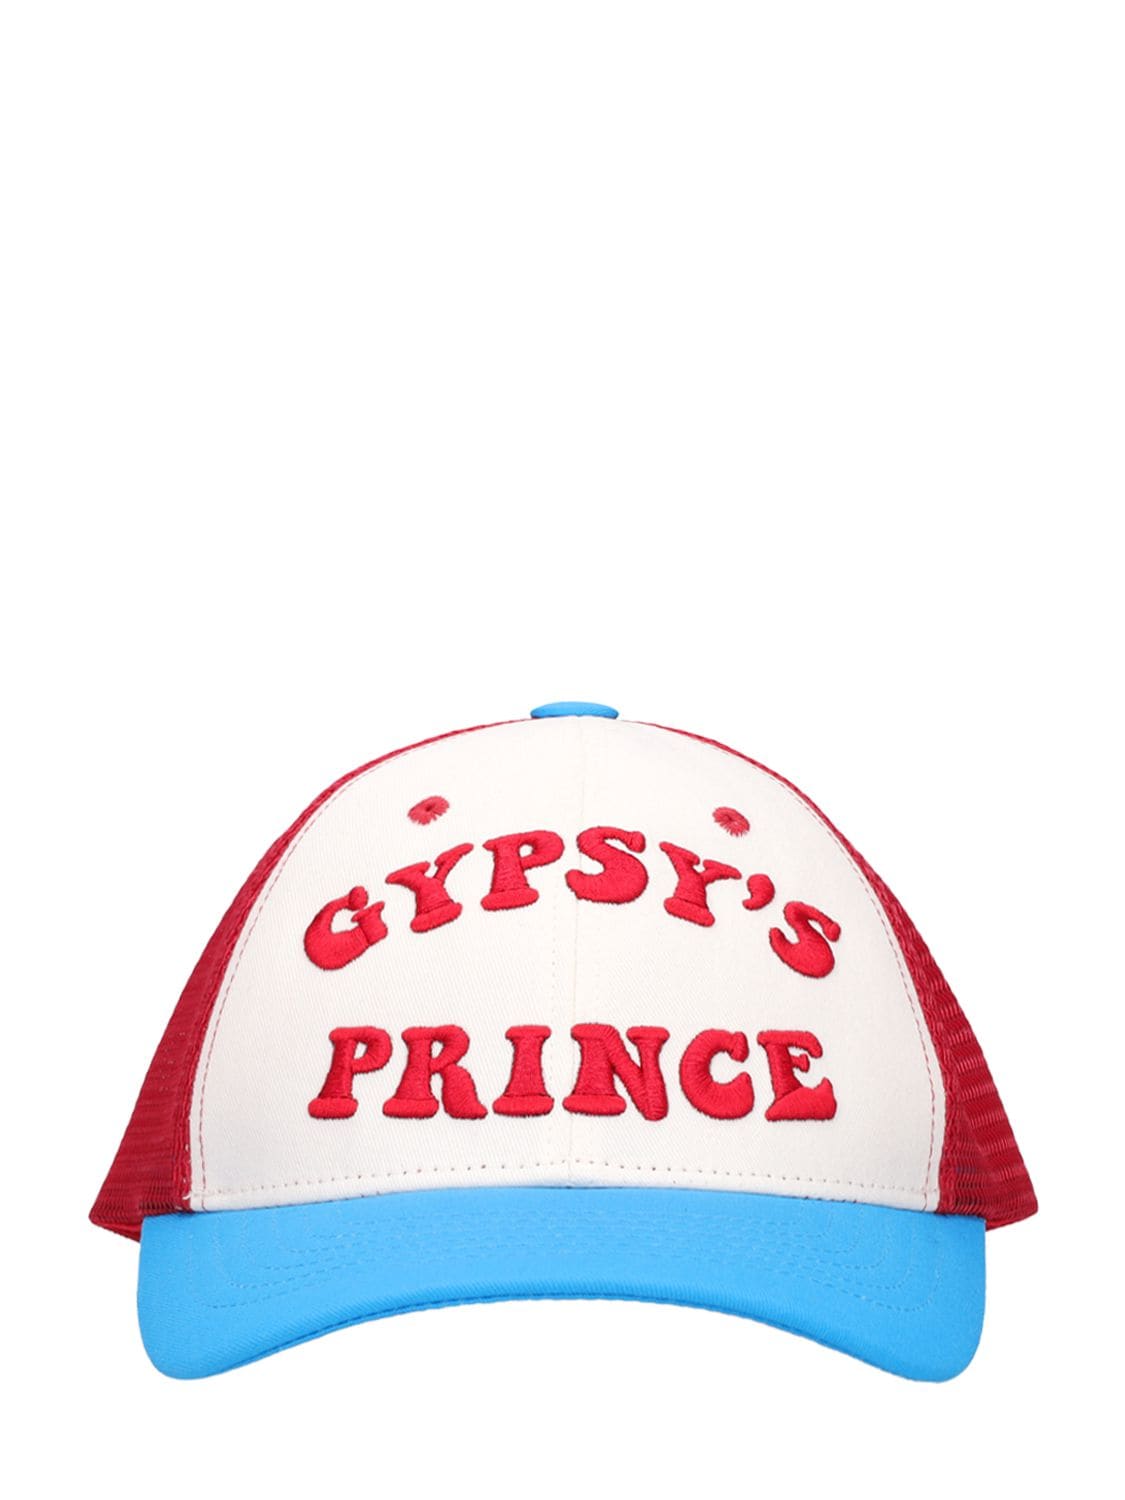 Gypsy's Prince Embroidery Cotton Cap - ANDERSSON BELL - Modalova